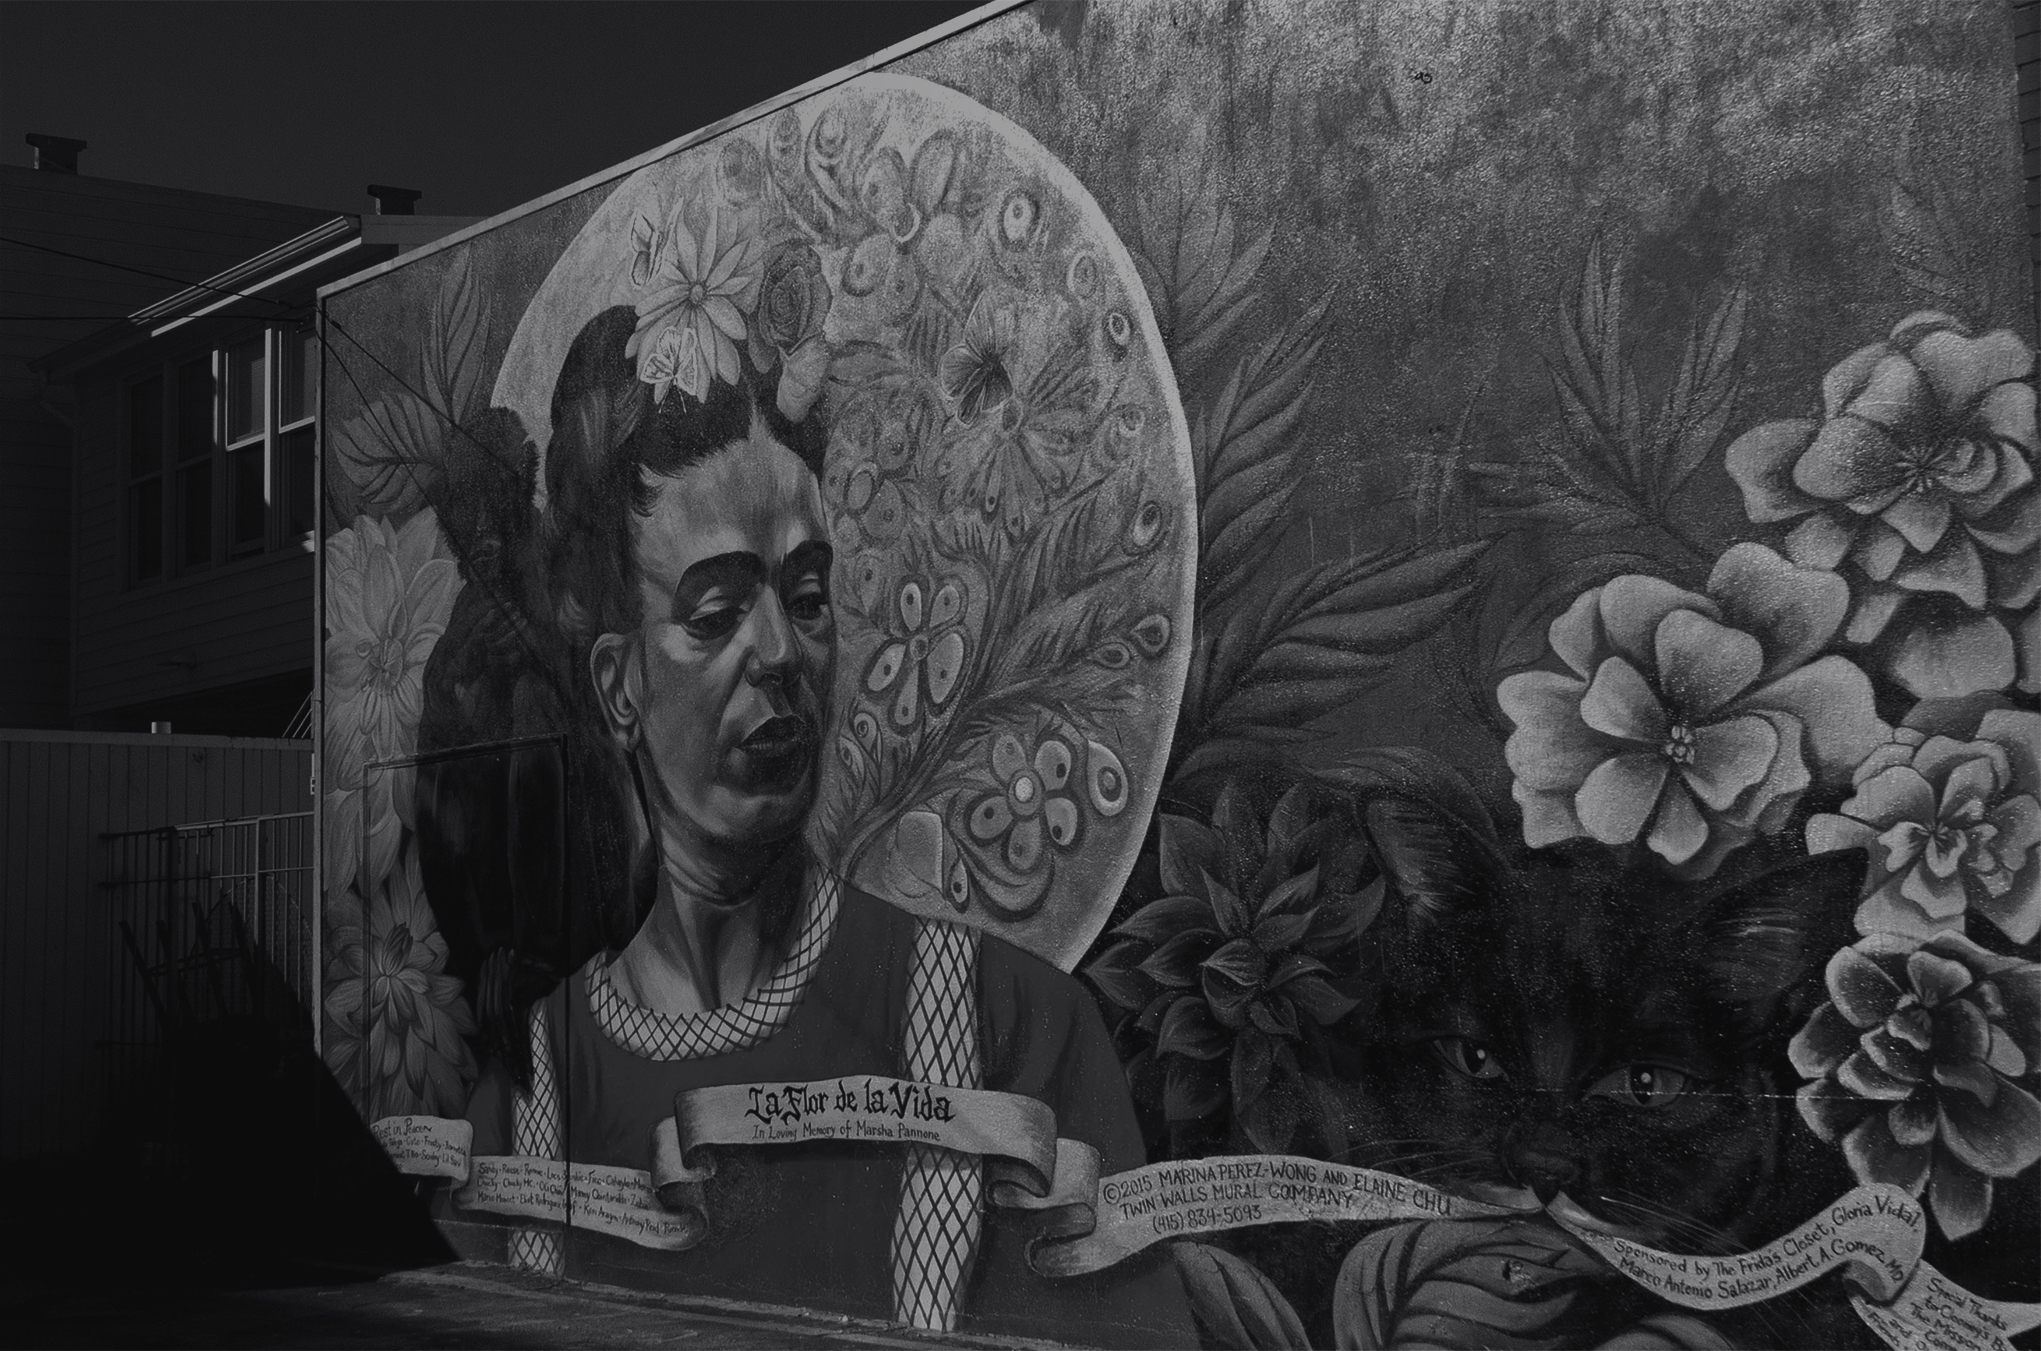 Black and white photo of a street mural in the Mission District in San Francisco. The mural is a stylized depiction of the Mexican Artist Frida Kahlo and other decorative elements.